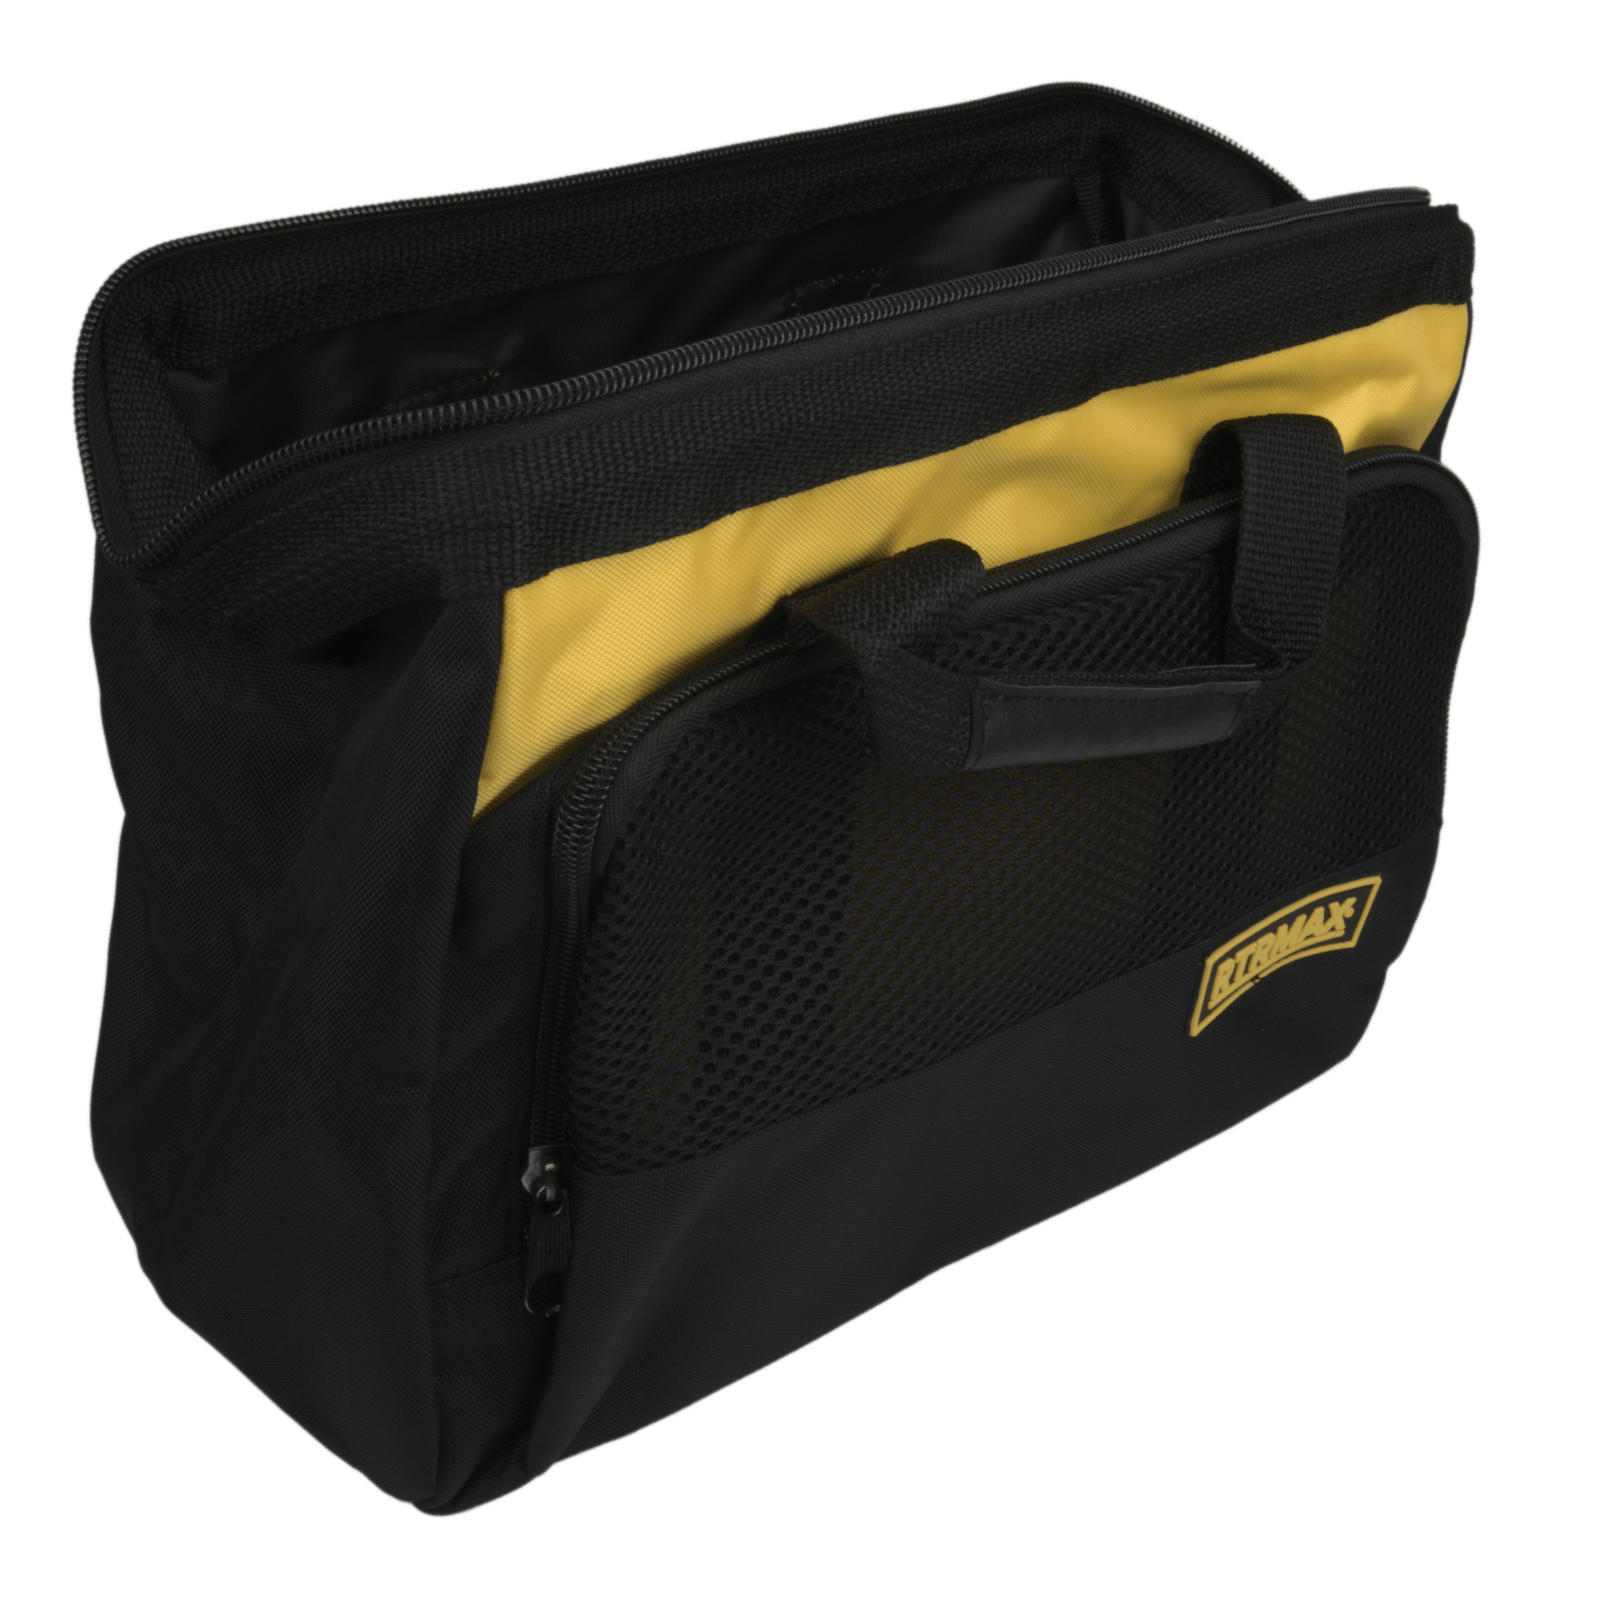 Black and Yellow toolbag with RTRMAX logo, zip pockets and carry handle